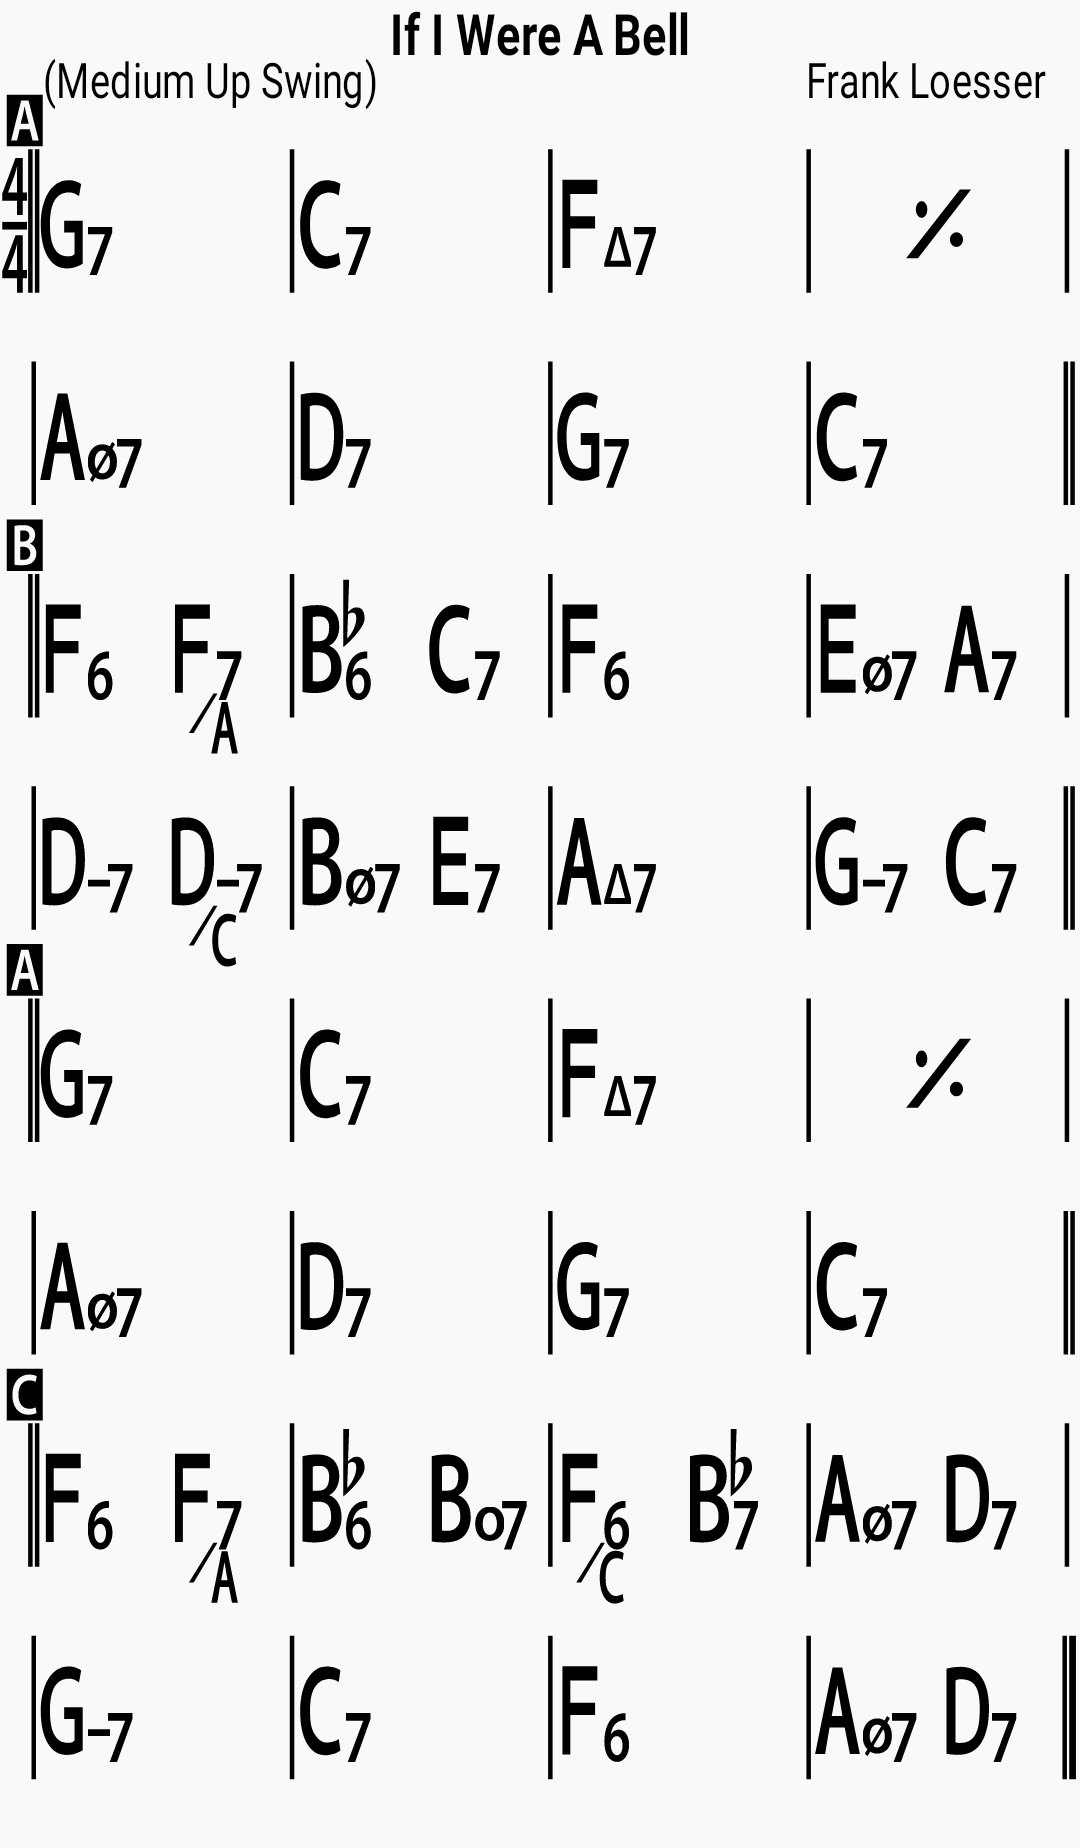 Chord chart for the jazz standard If I Were A Bell